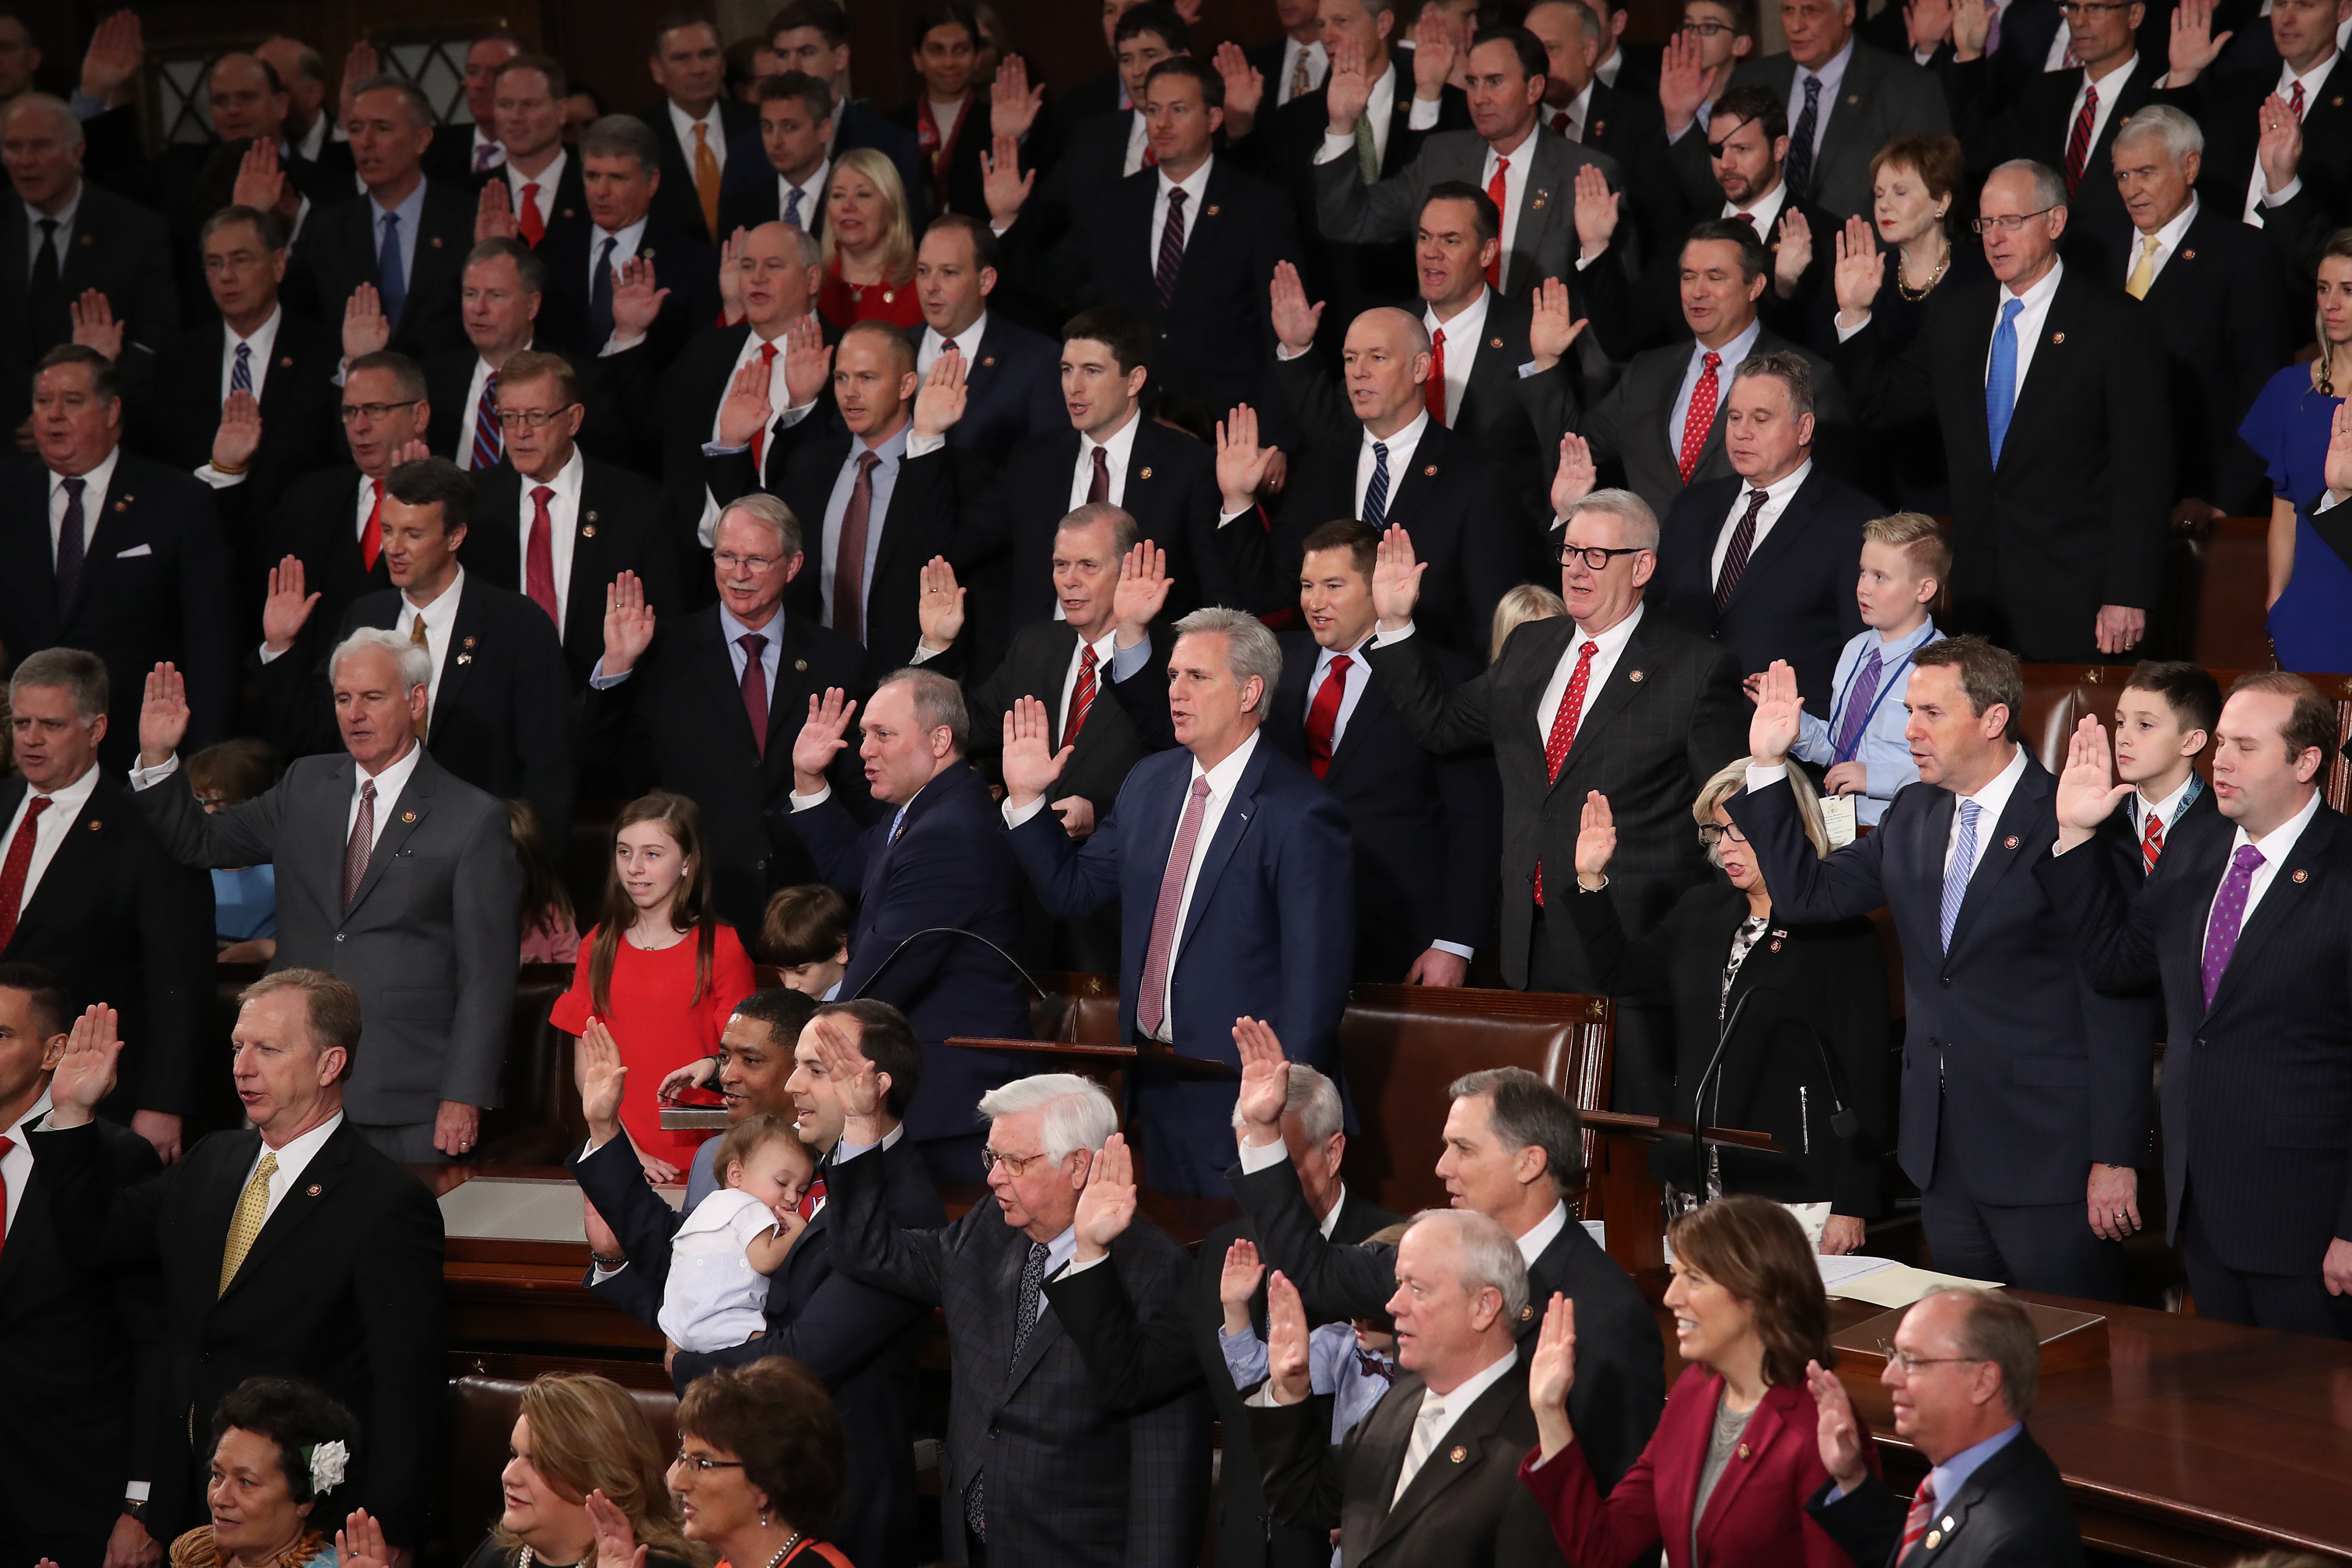 Republican members of the House of Representatives are sworn in during the first session of the 116th Congress at the U.S. Capitol. (Win McNamee—Getty Images)